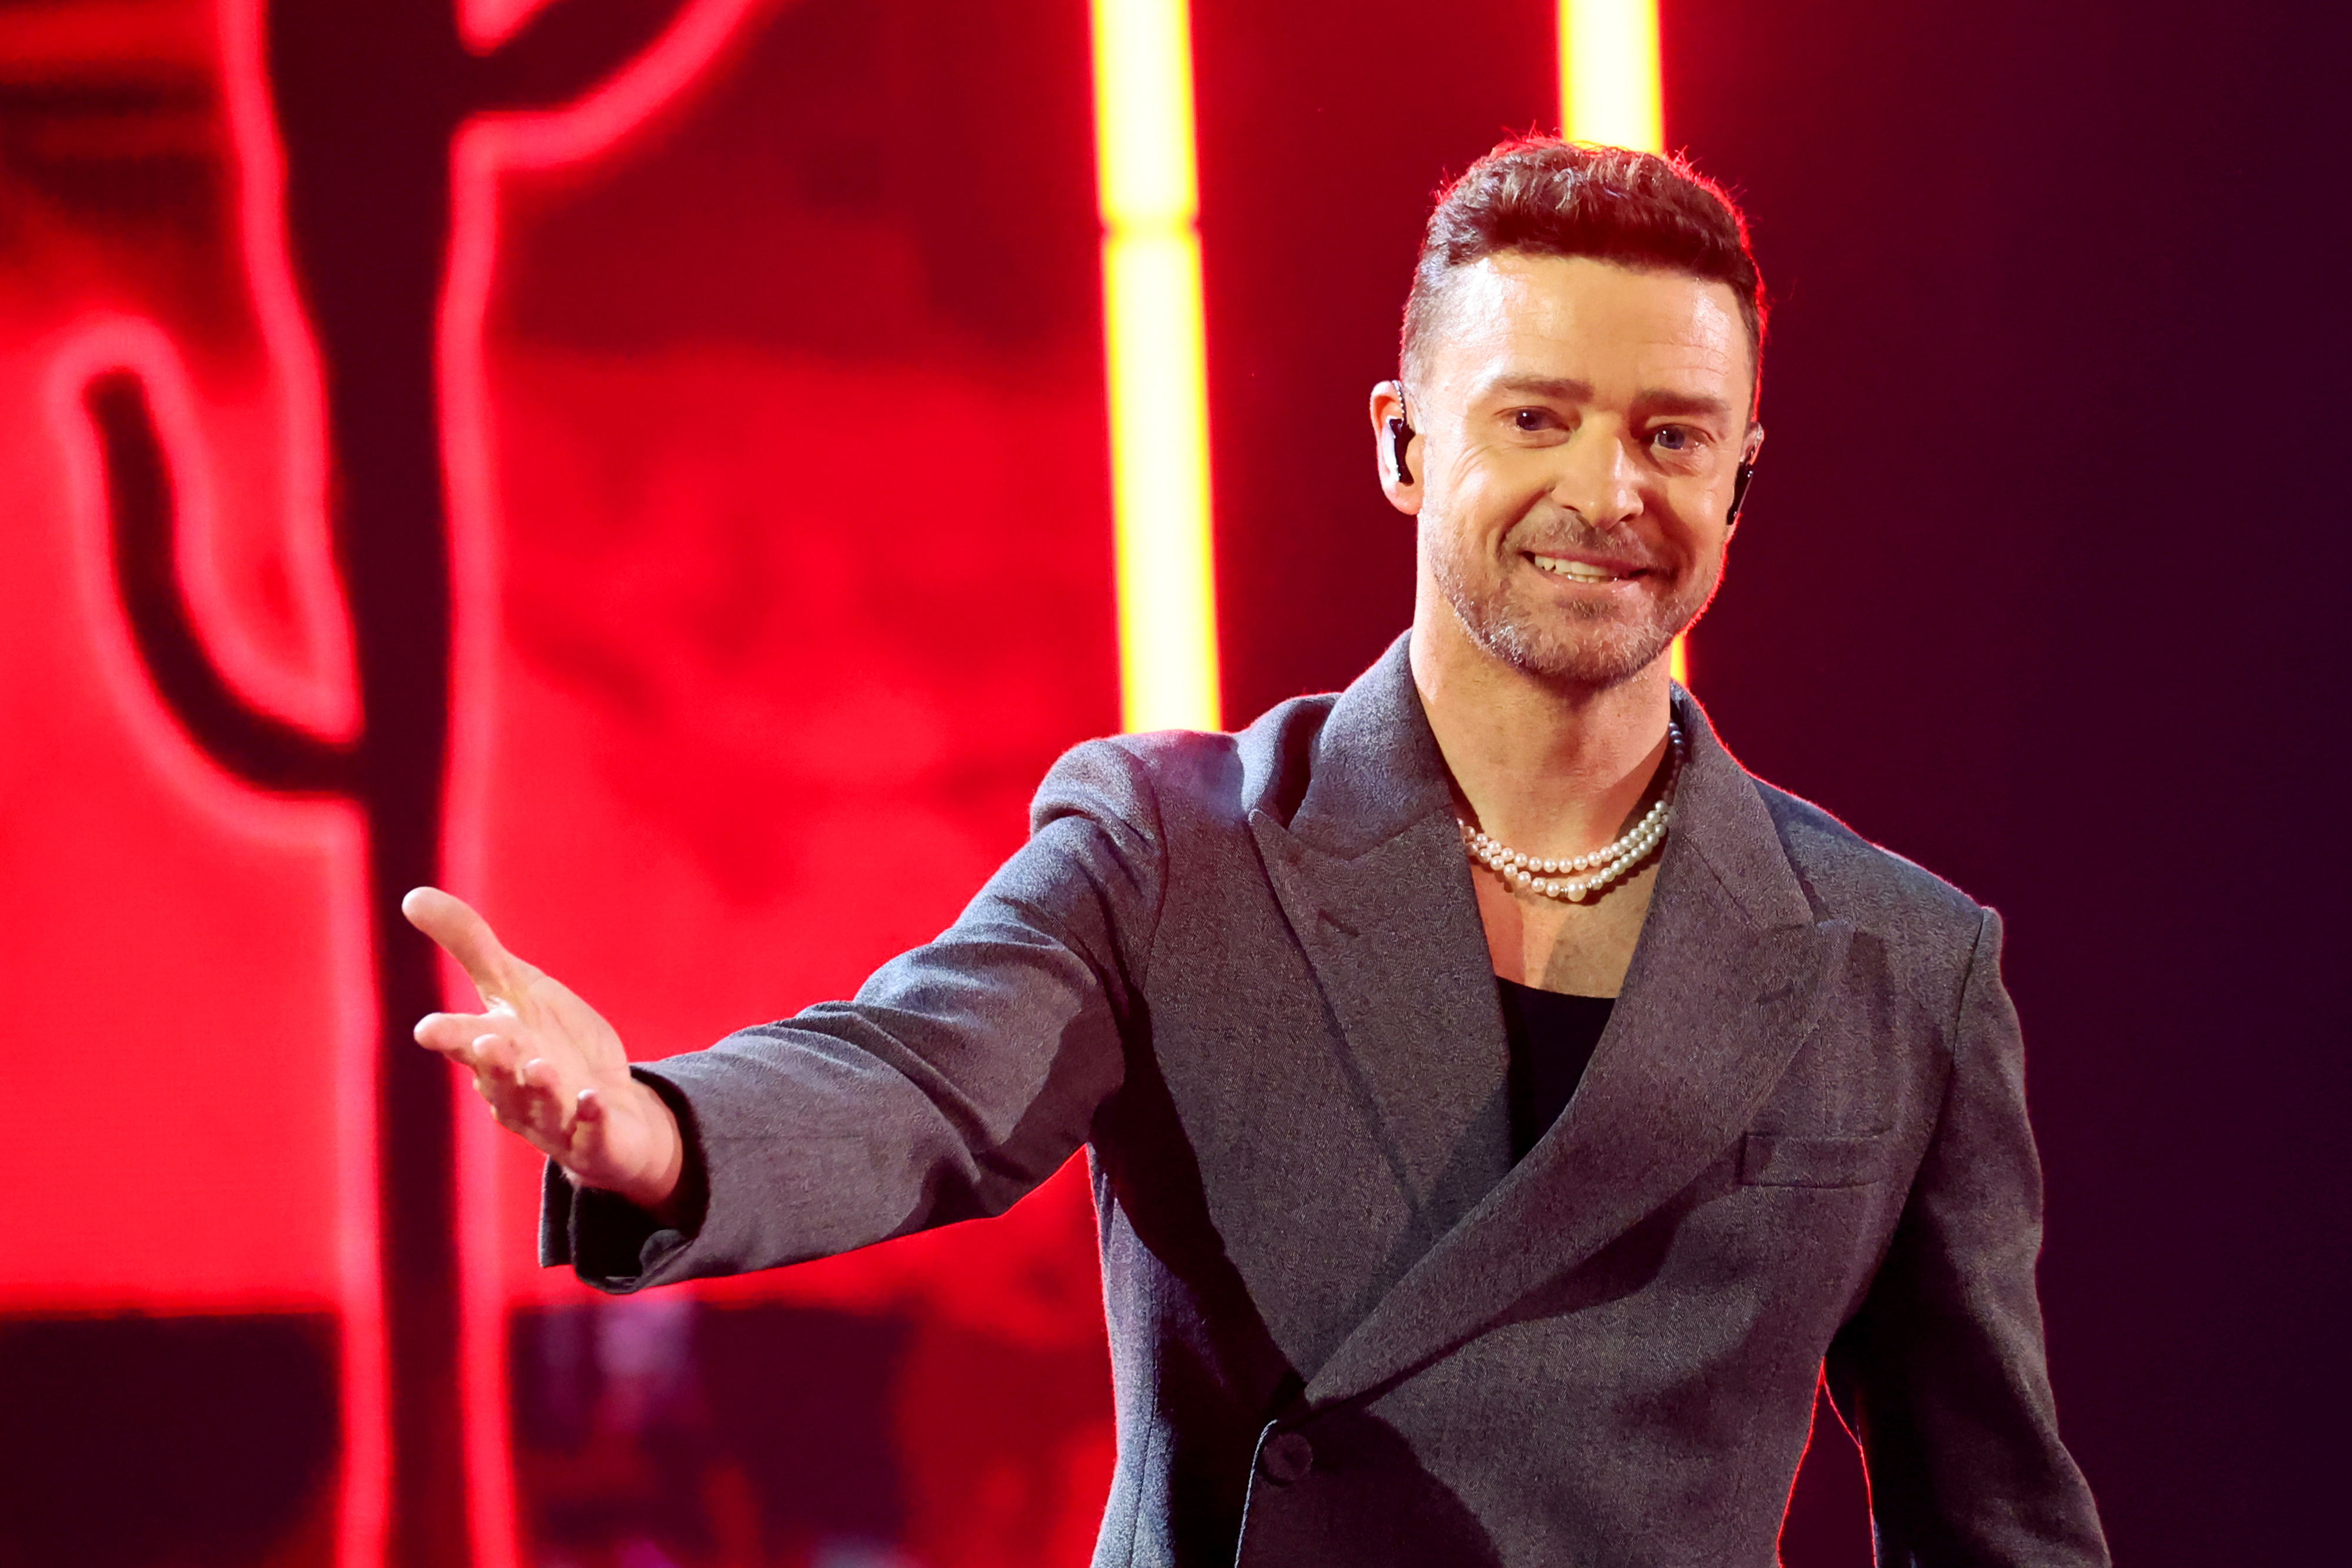 Justin Timberlake on stage, wearing a dark double-breasted blazer with a pearl necklace, smiling and extending his right hand